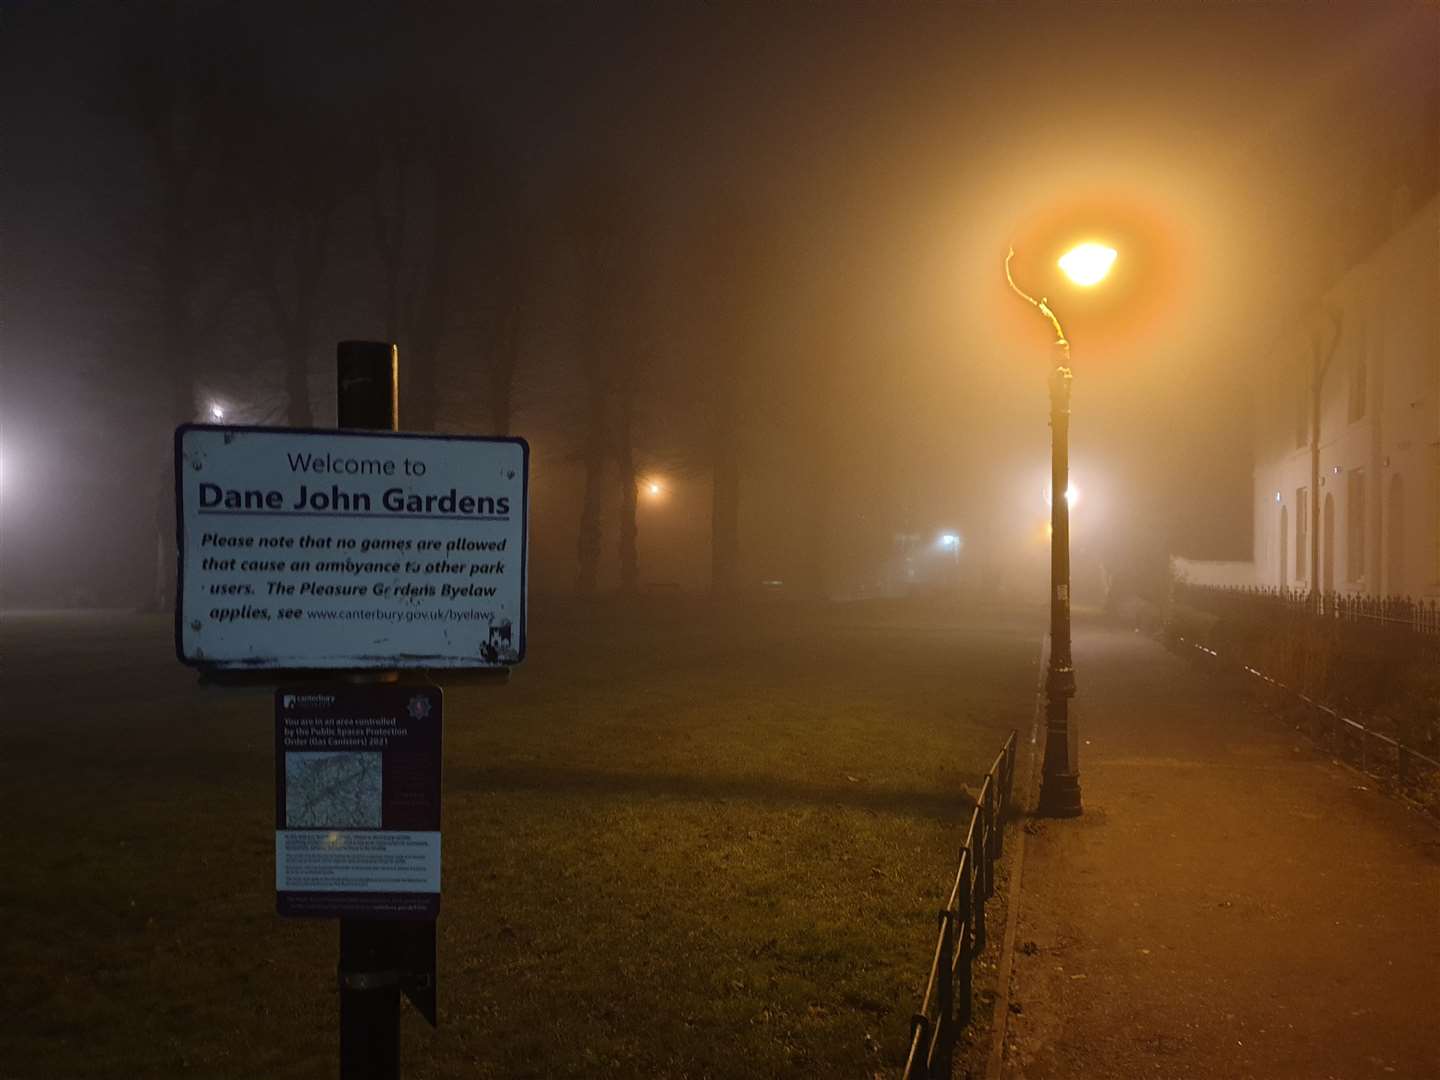 The Dane John Gardens in Canterbury is a magnet for crime at night